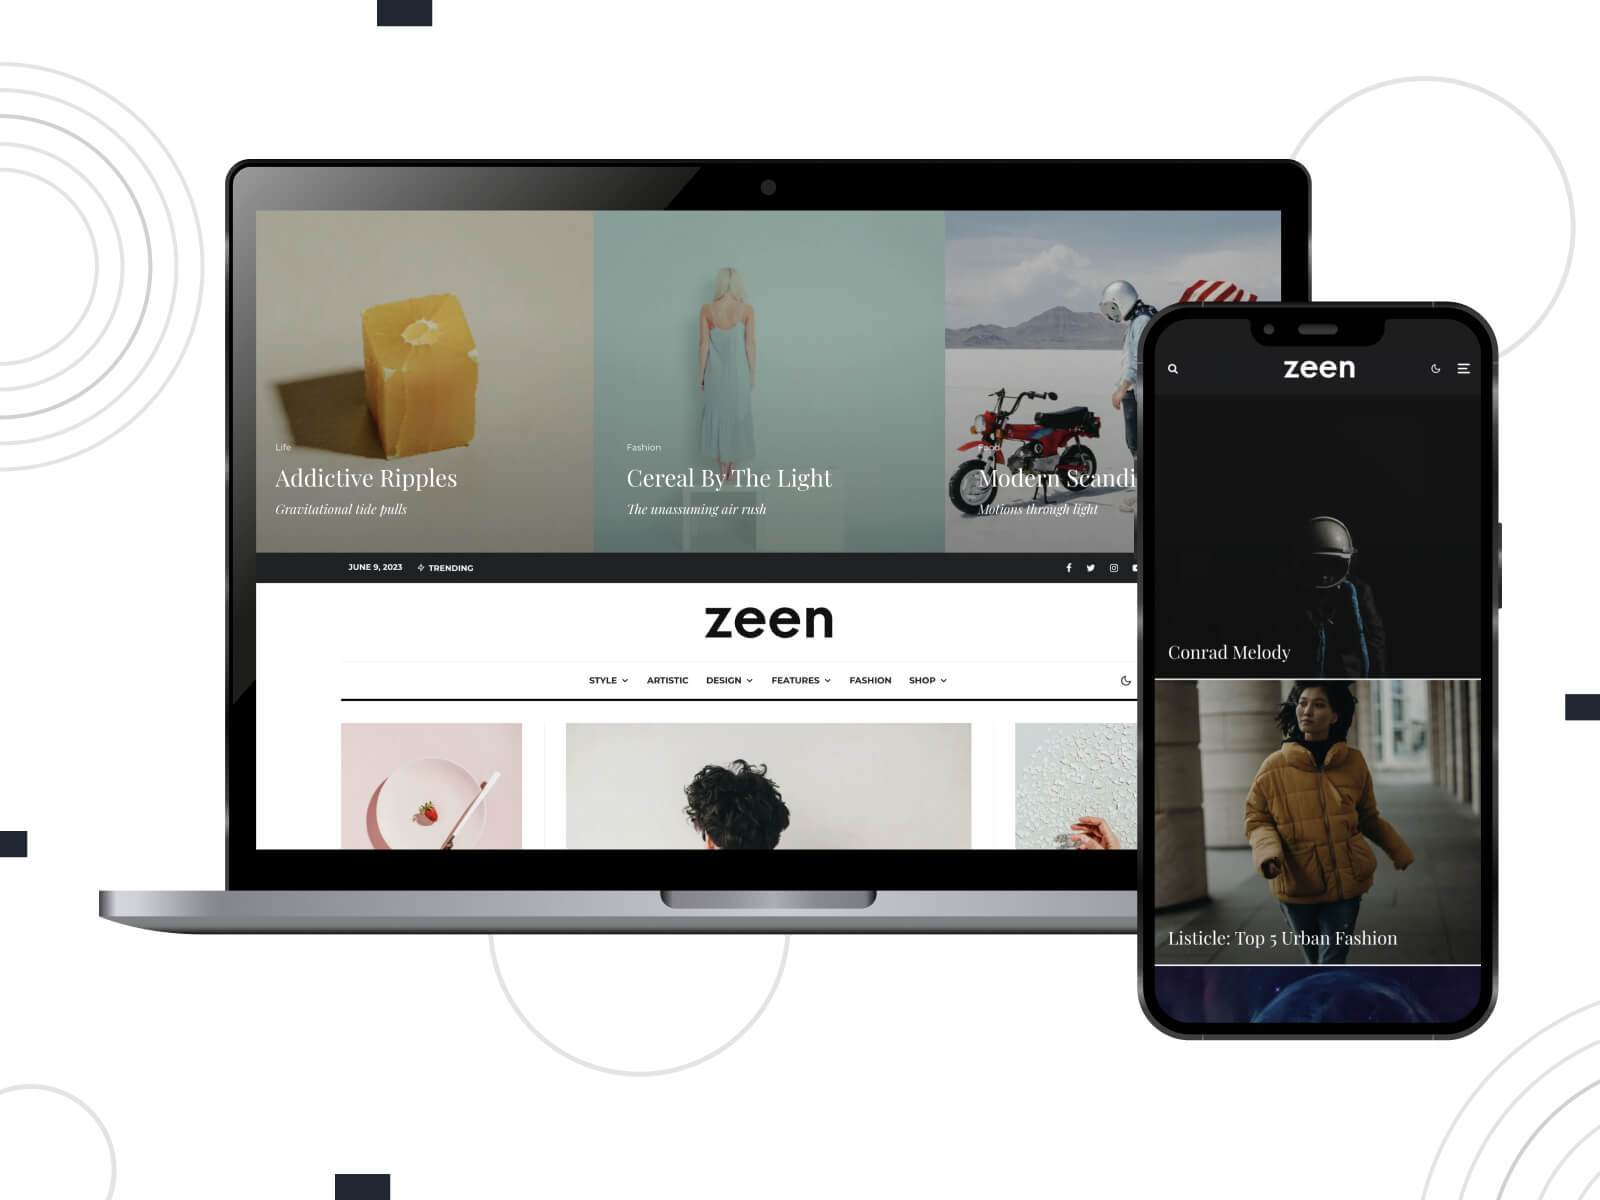 Picture of Zeen - light, cool, feature-rich WordPress theme for magazine profiles in dark olive green, sienna, and gray color mix.